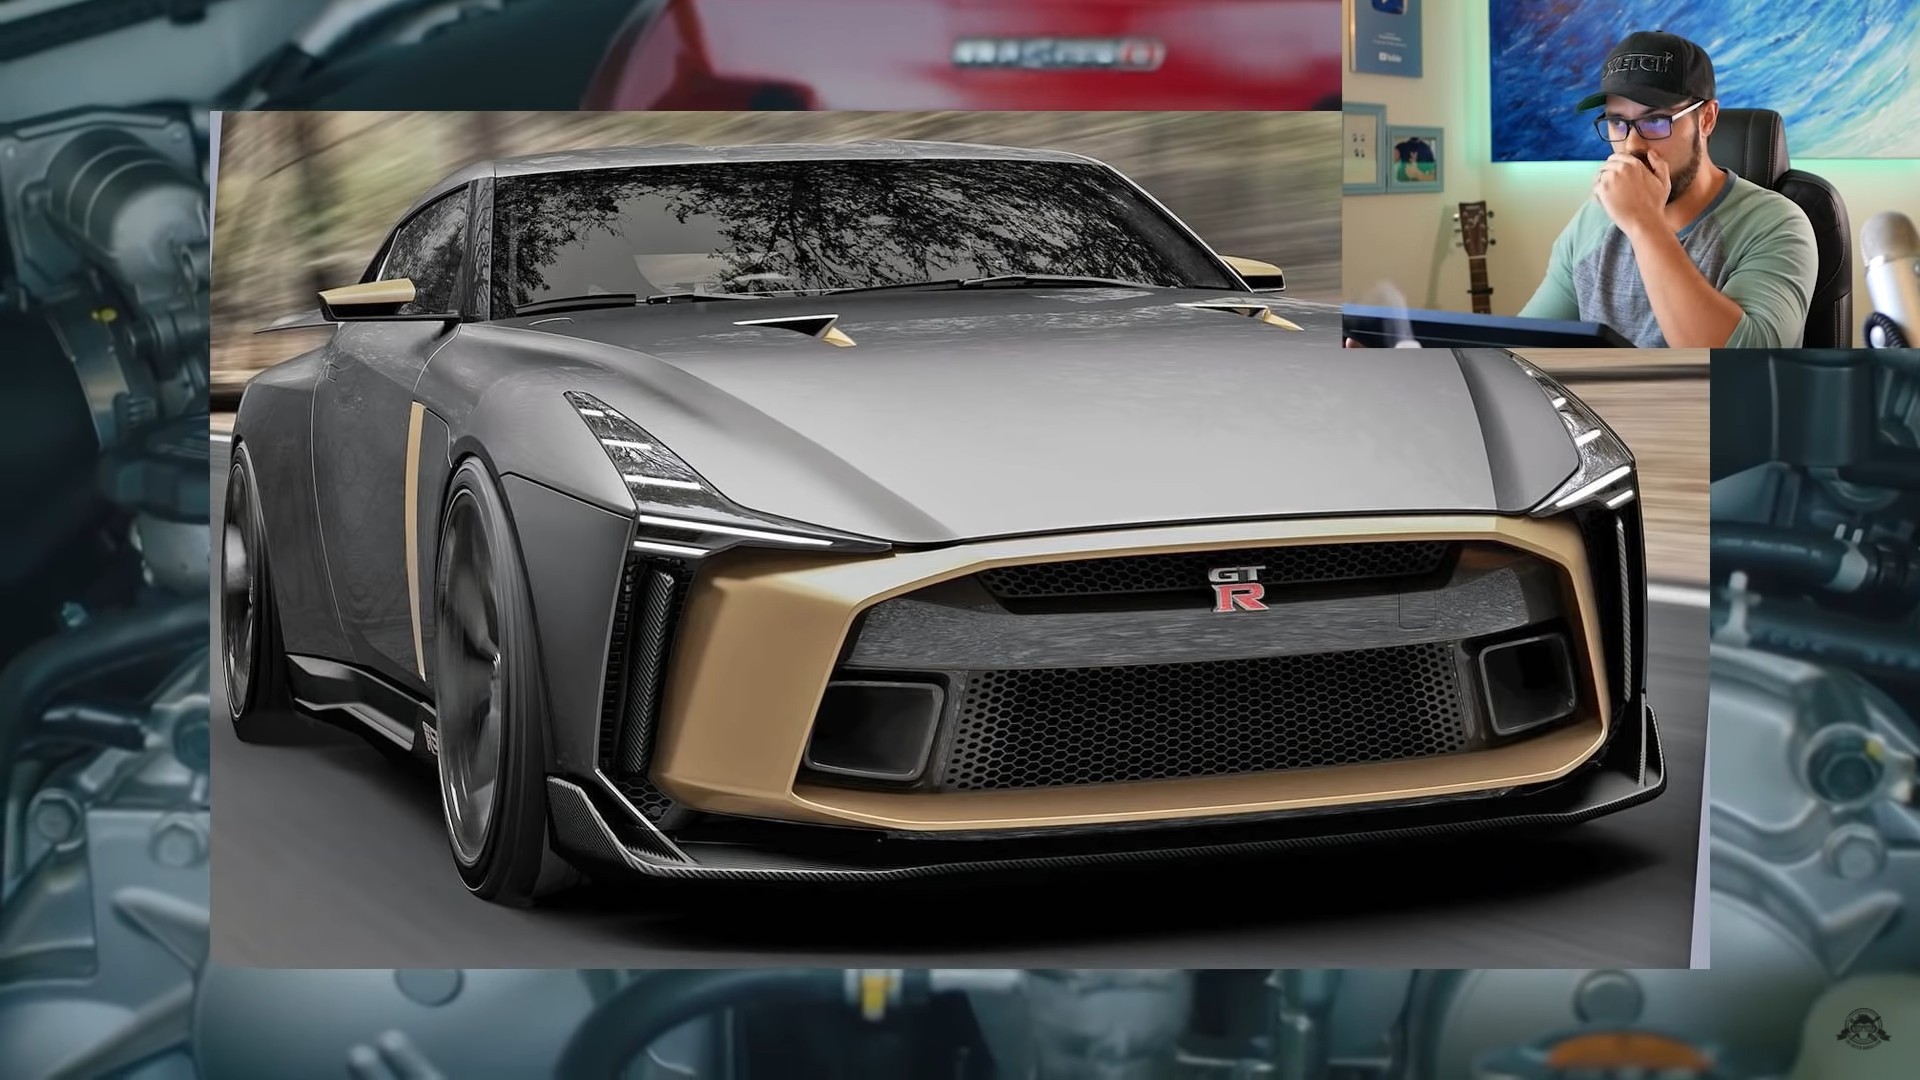 Nissan GTR: Is this R36 concept hot or not? Photo @carwow